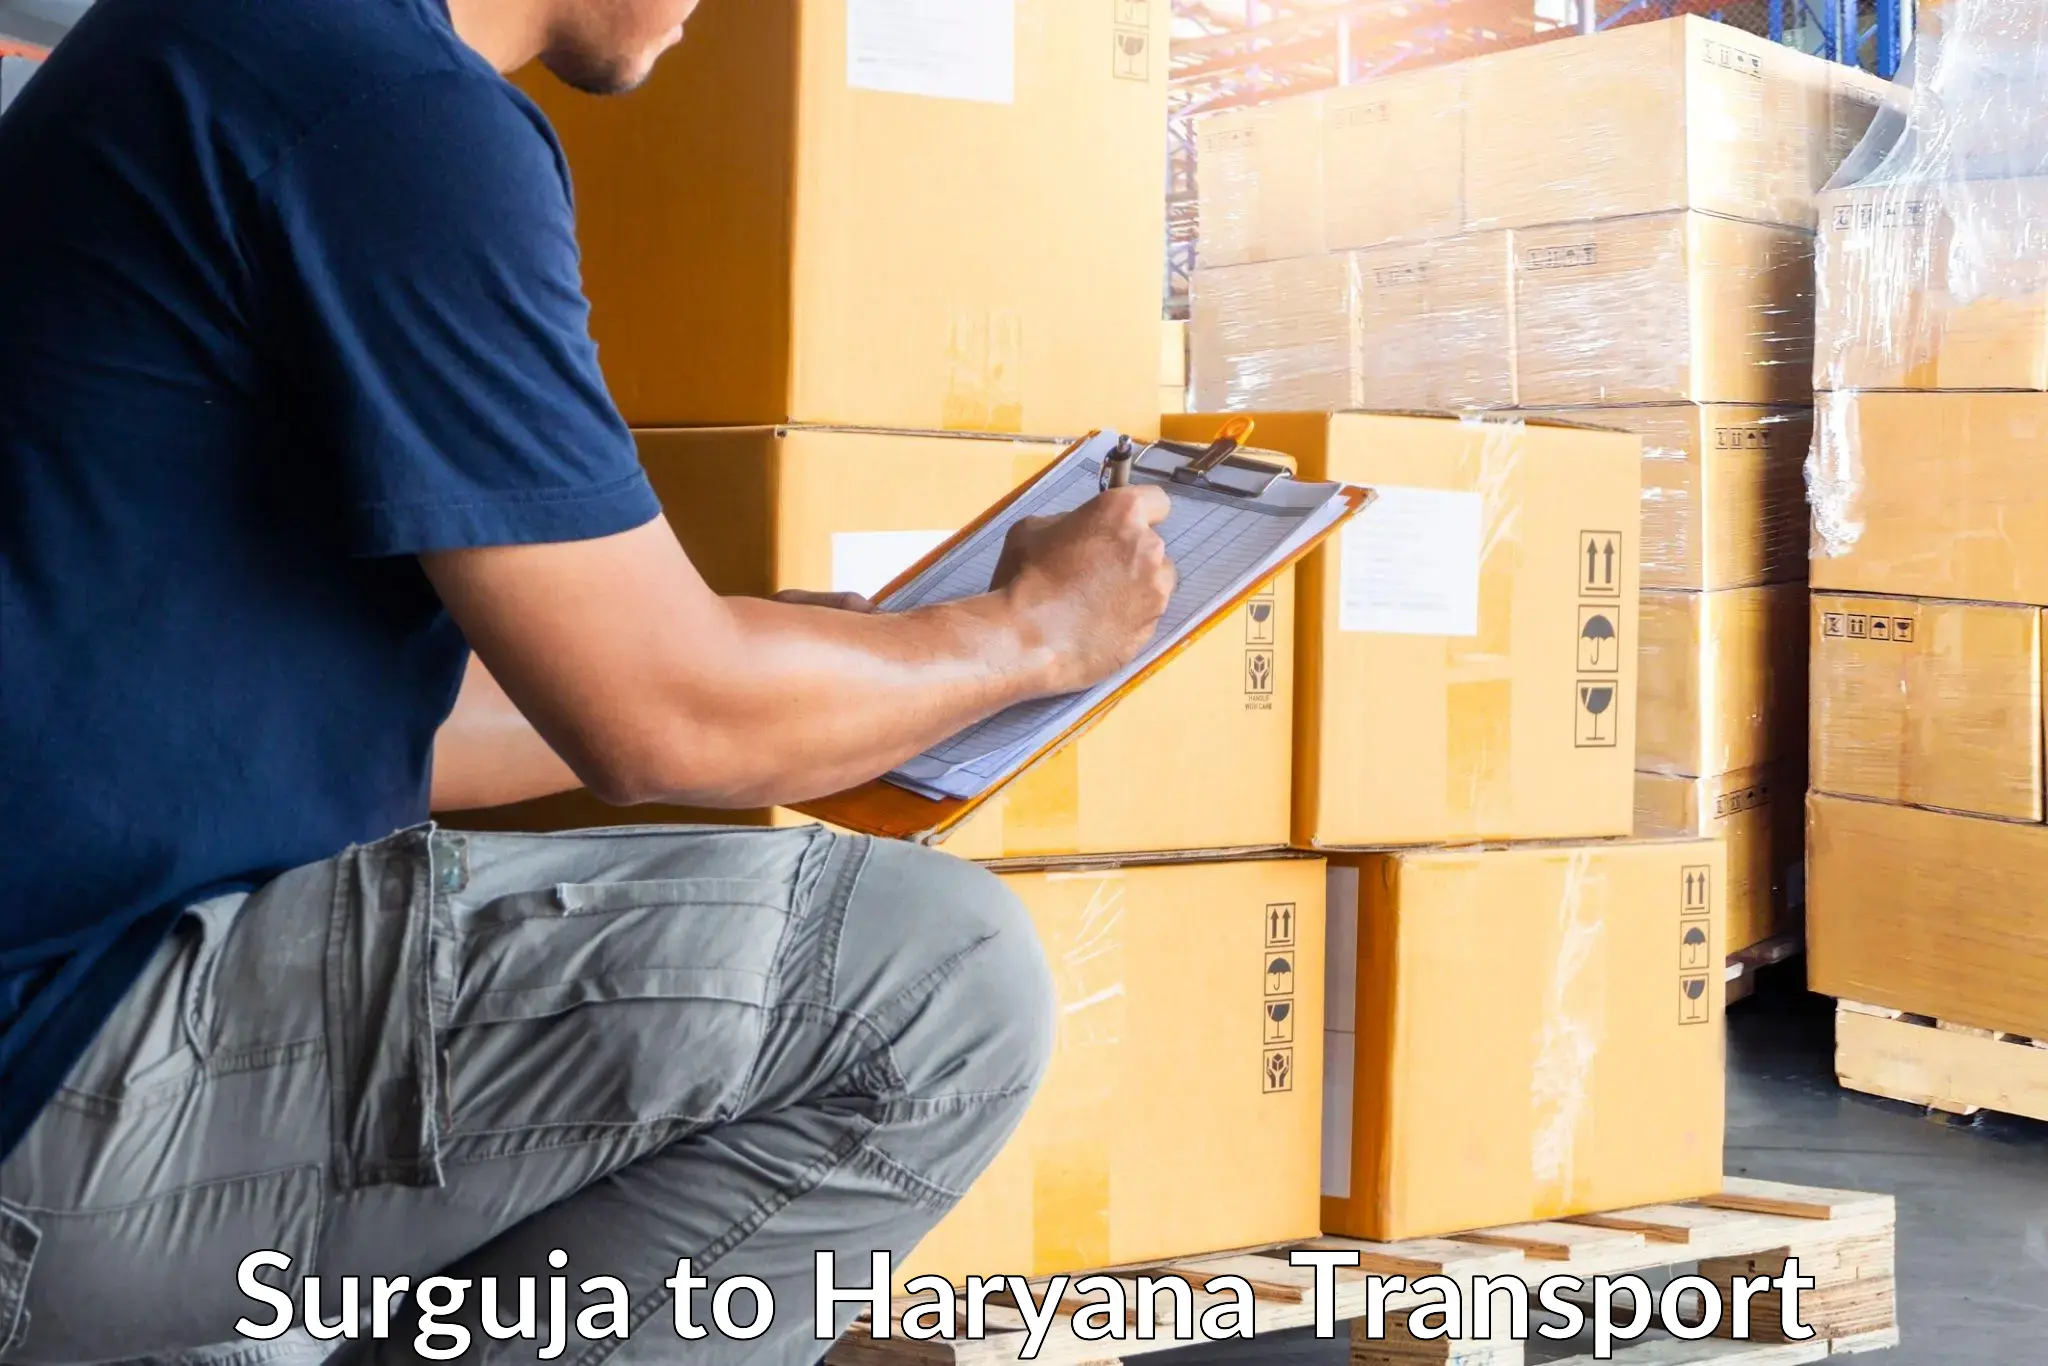 Air cargo transport services in Surguja to Hansi